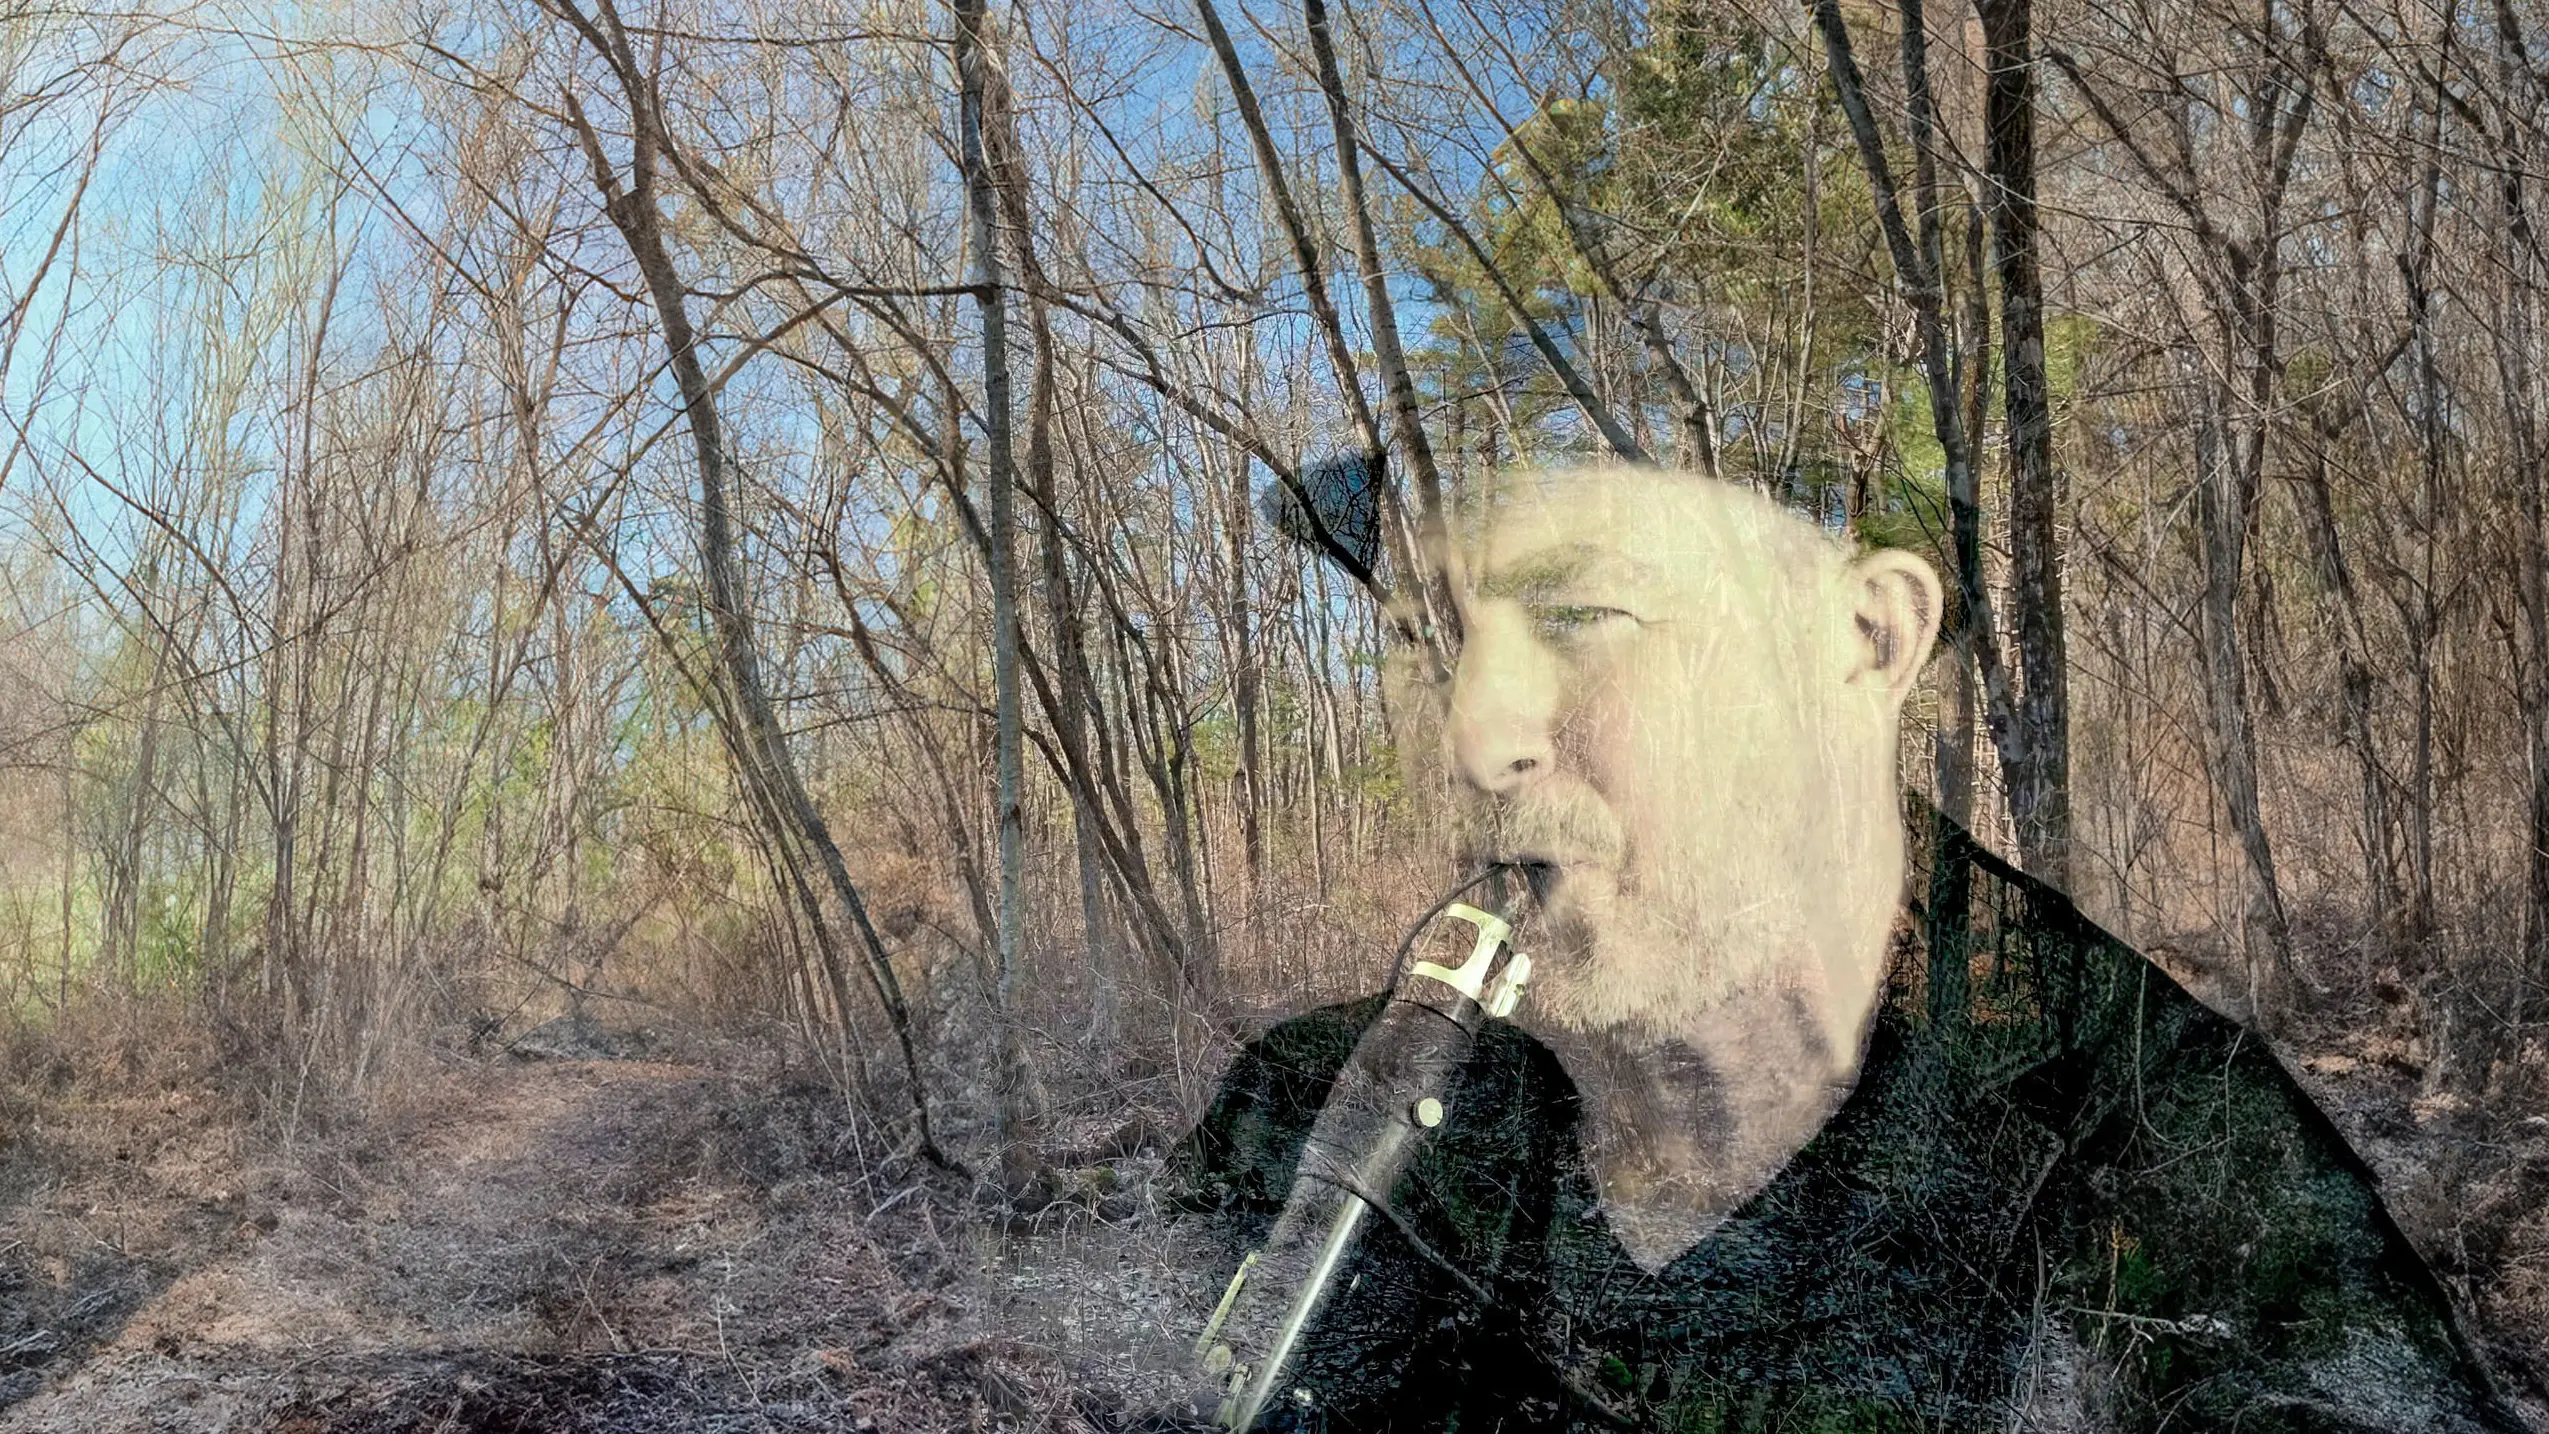 A headshot of Evan Ziporyn playing the clarinet is overlayed on an image of leafless forest.